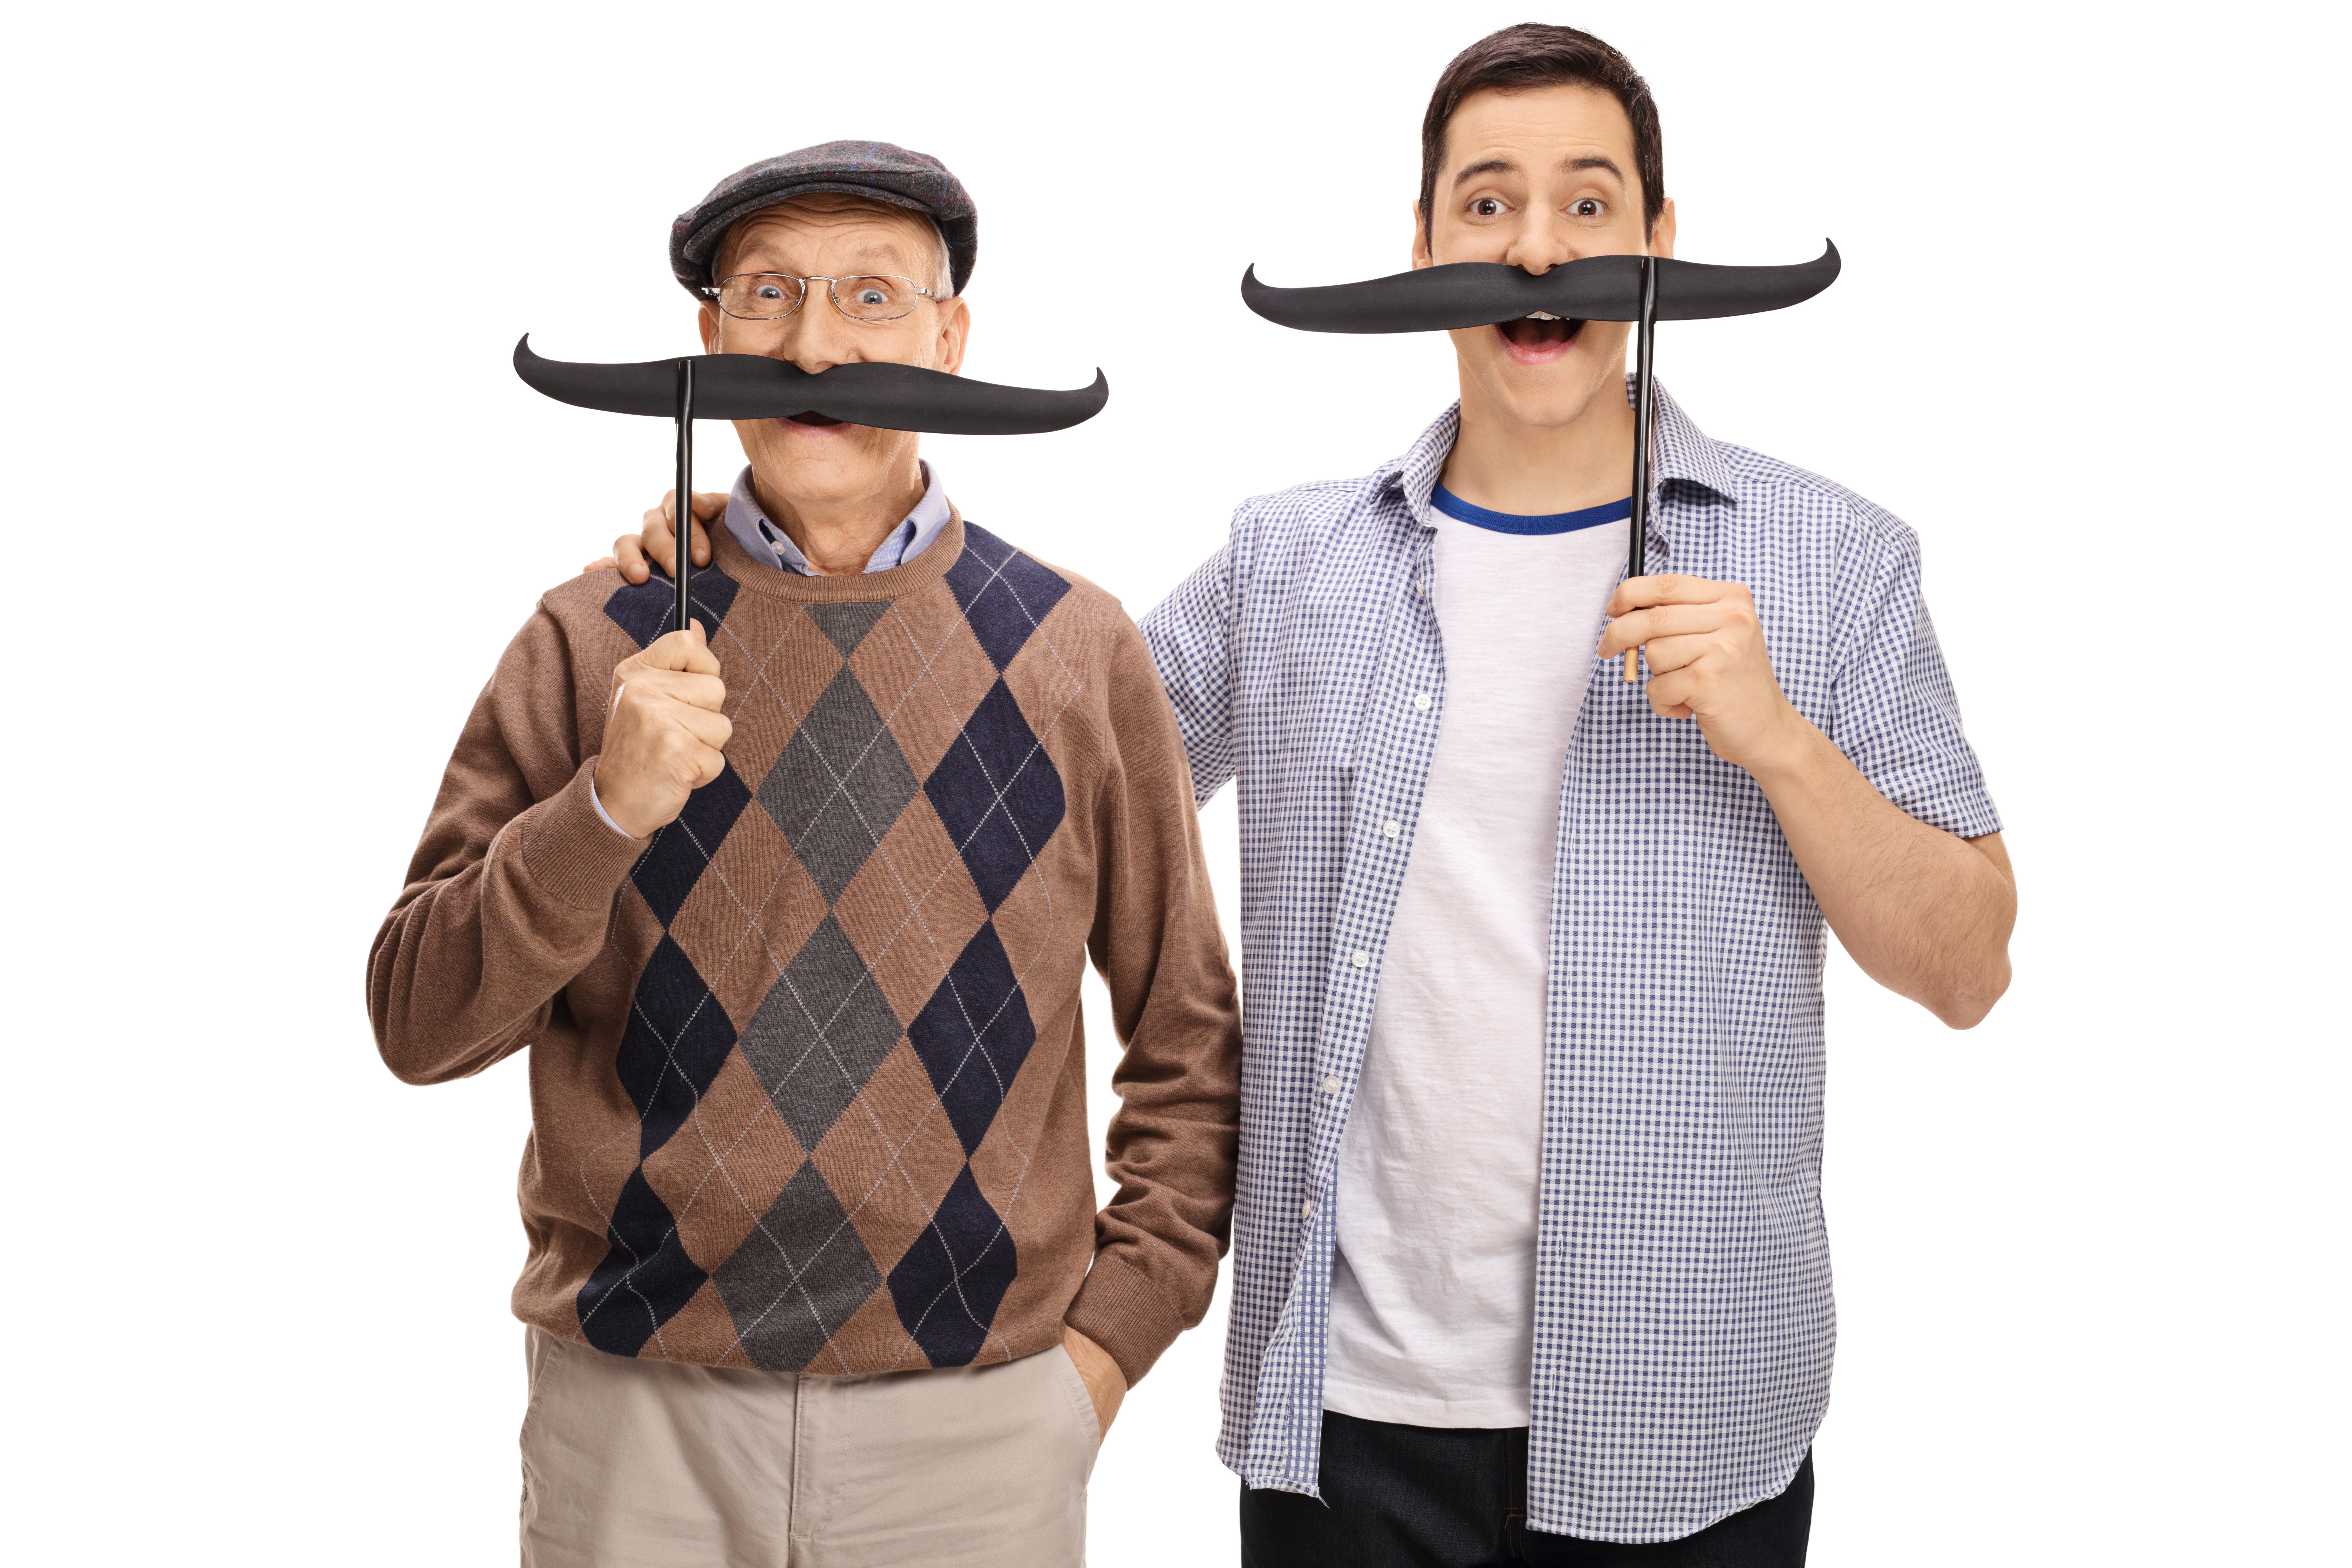 Senior and a young man posing with big fake moustaches